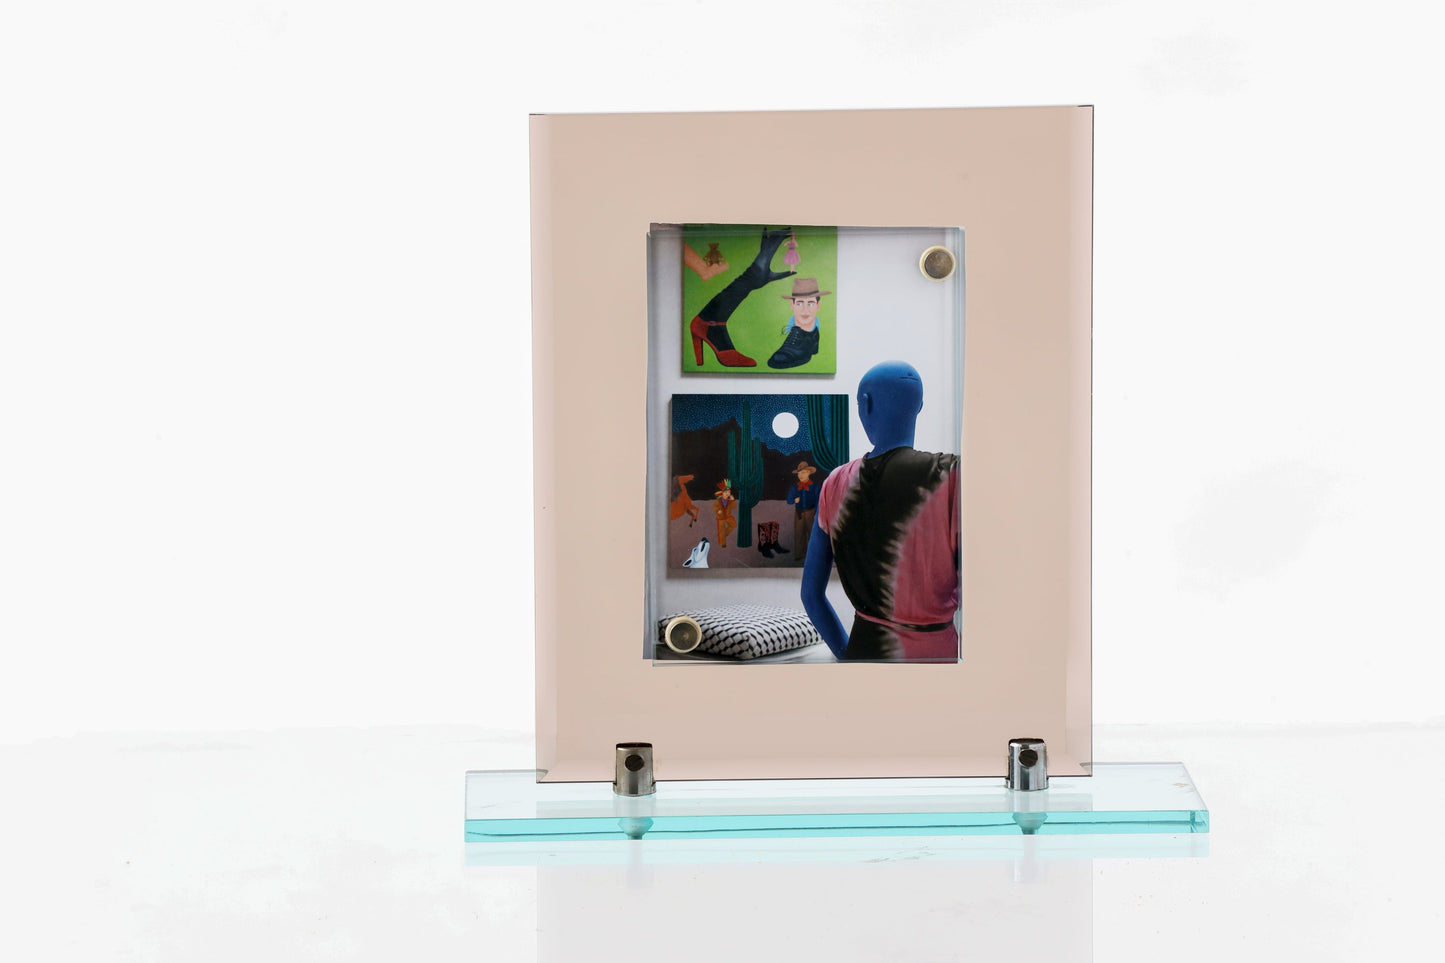 Smoked glass photo frame from the 70s